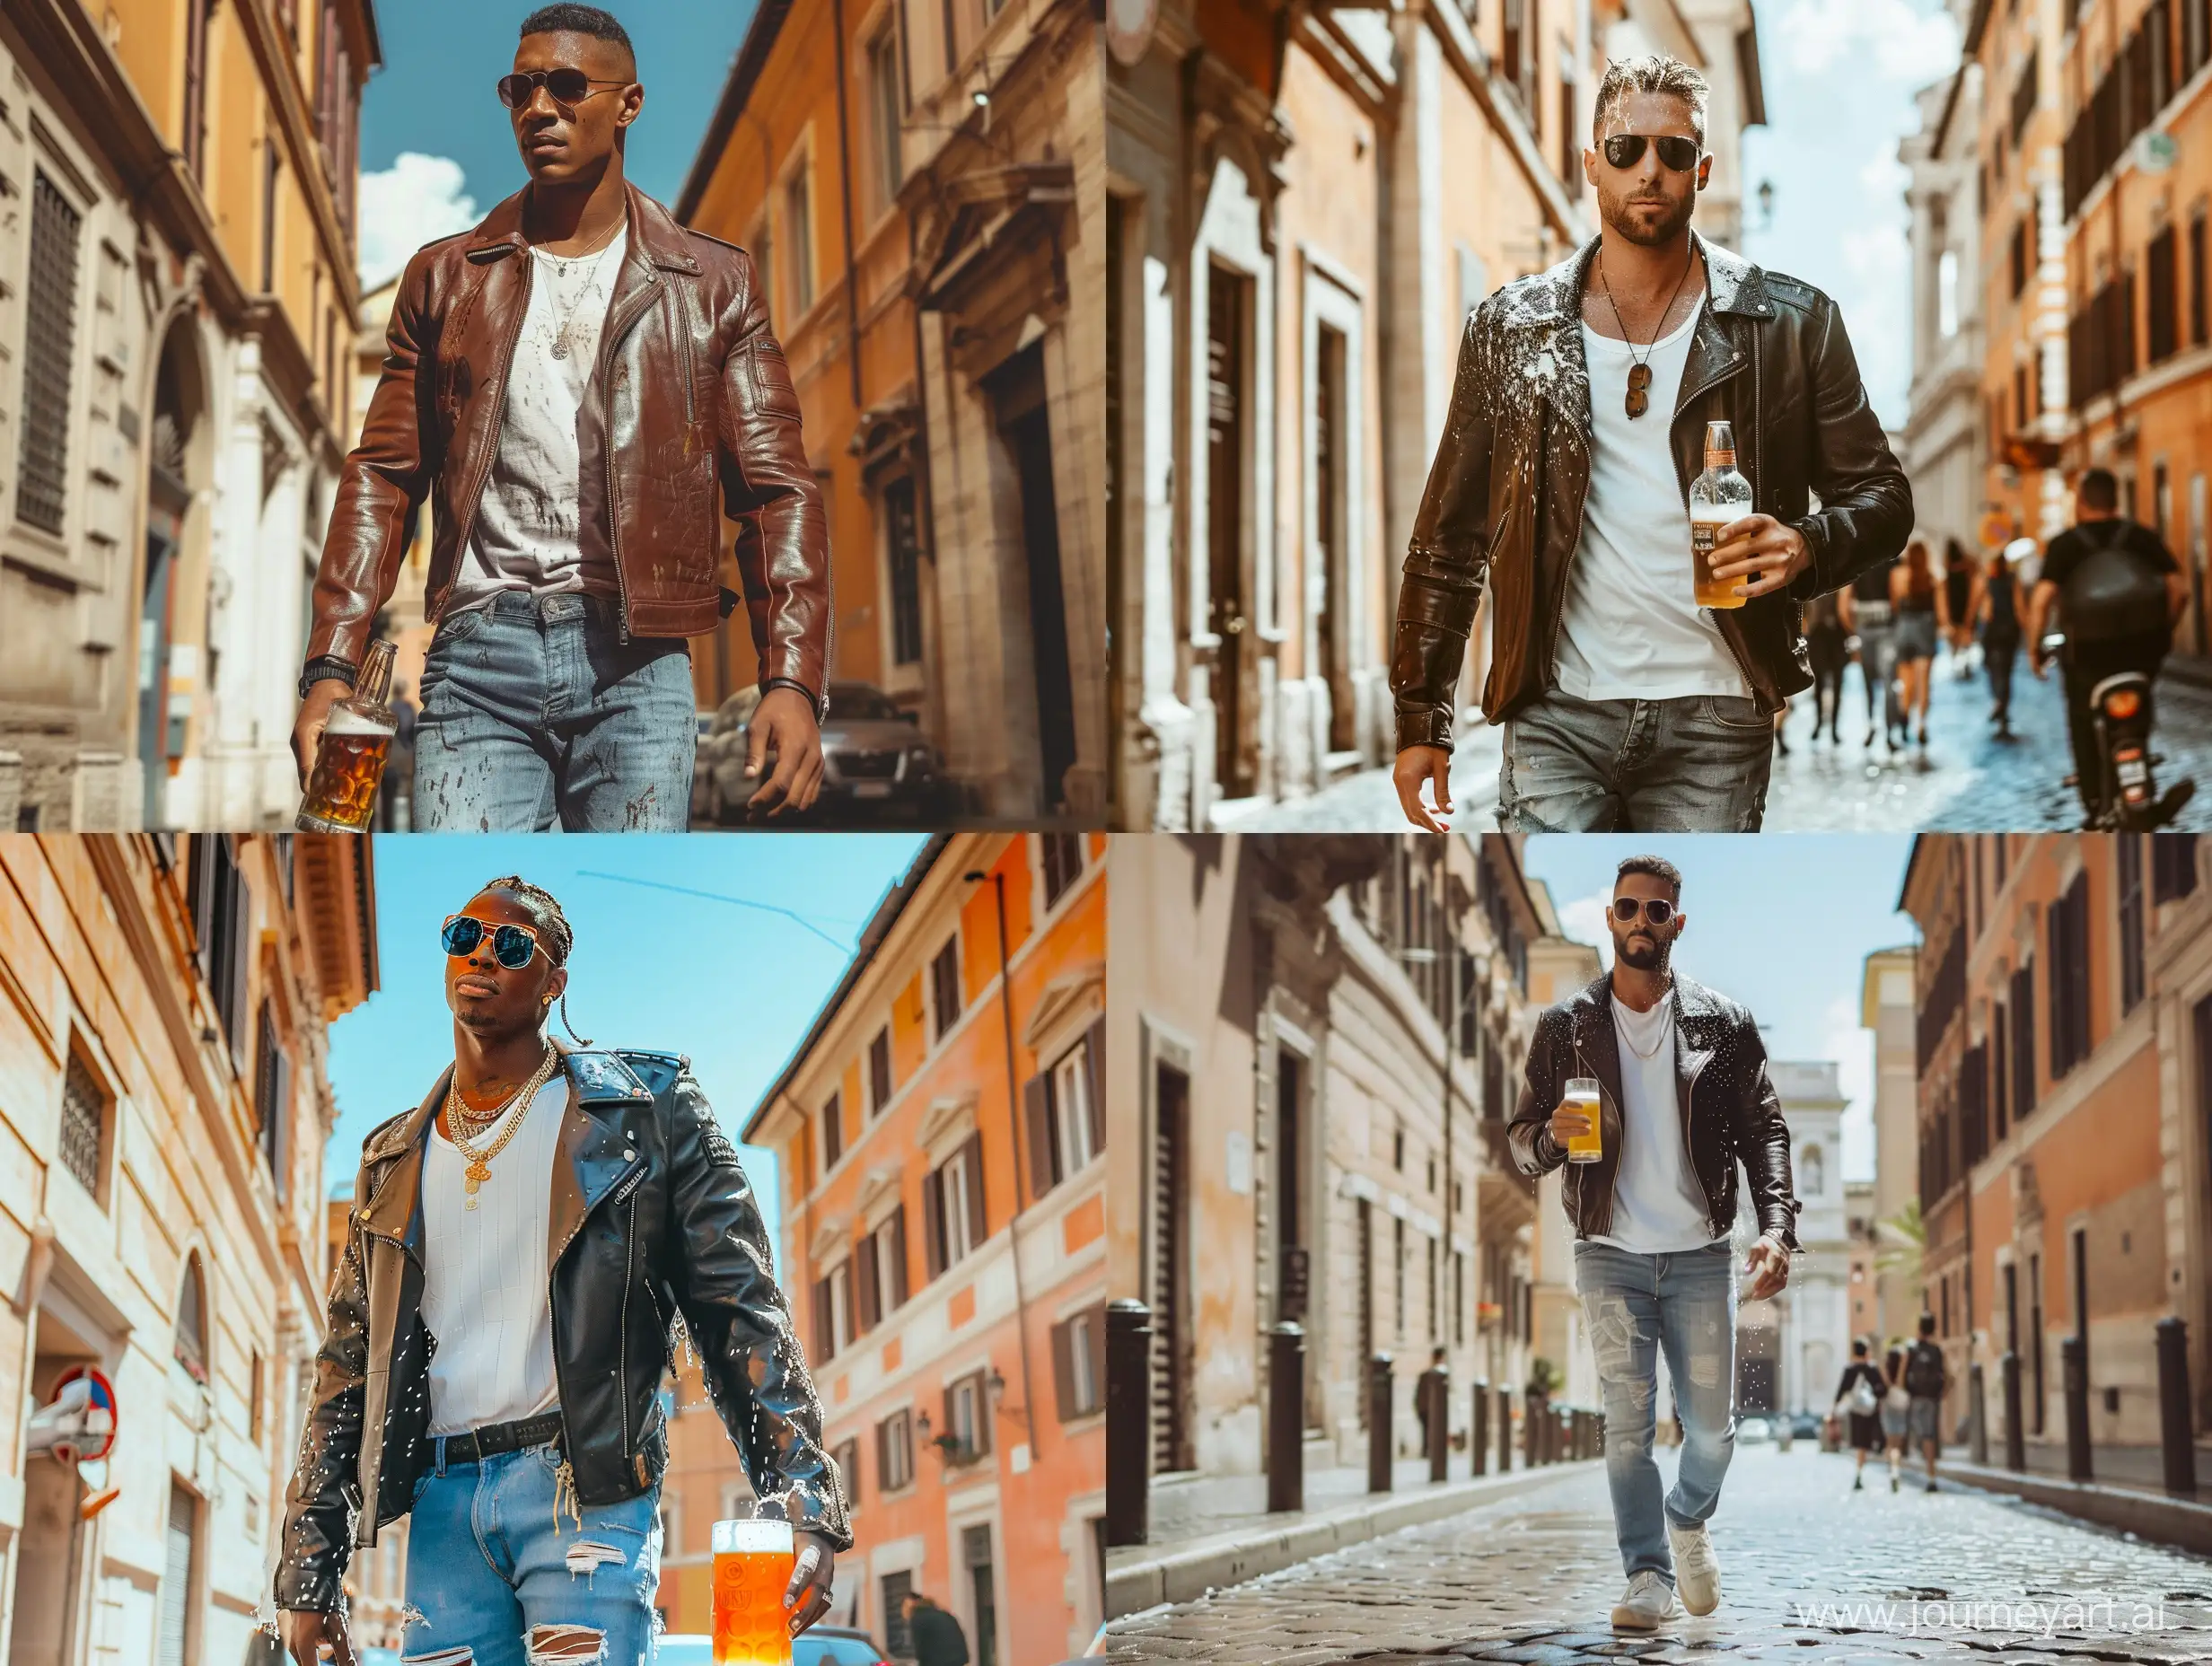 Kylian-Mbappe-Strolling-Through-Rome-in-Stylish-Attire-with-Beer-on-Sunny-Day